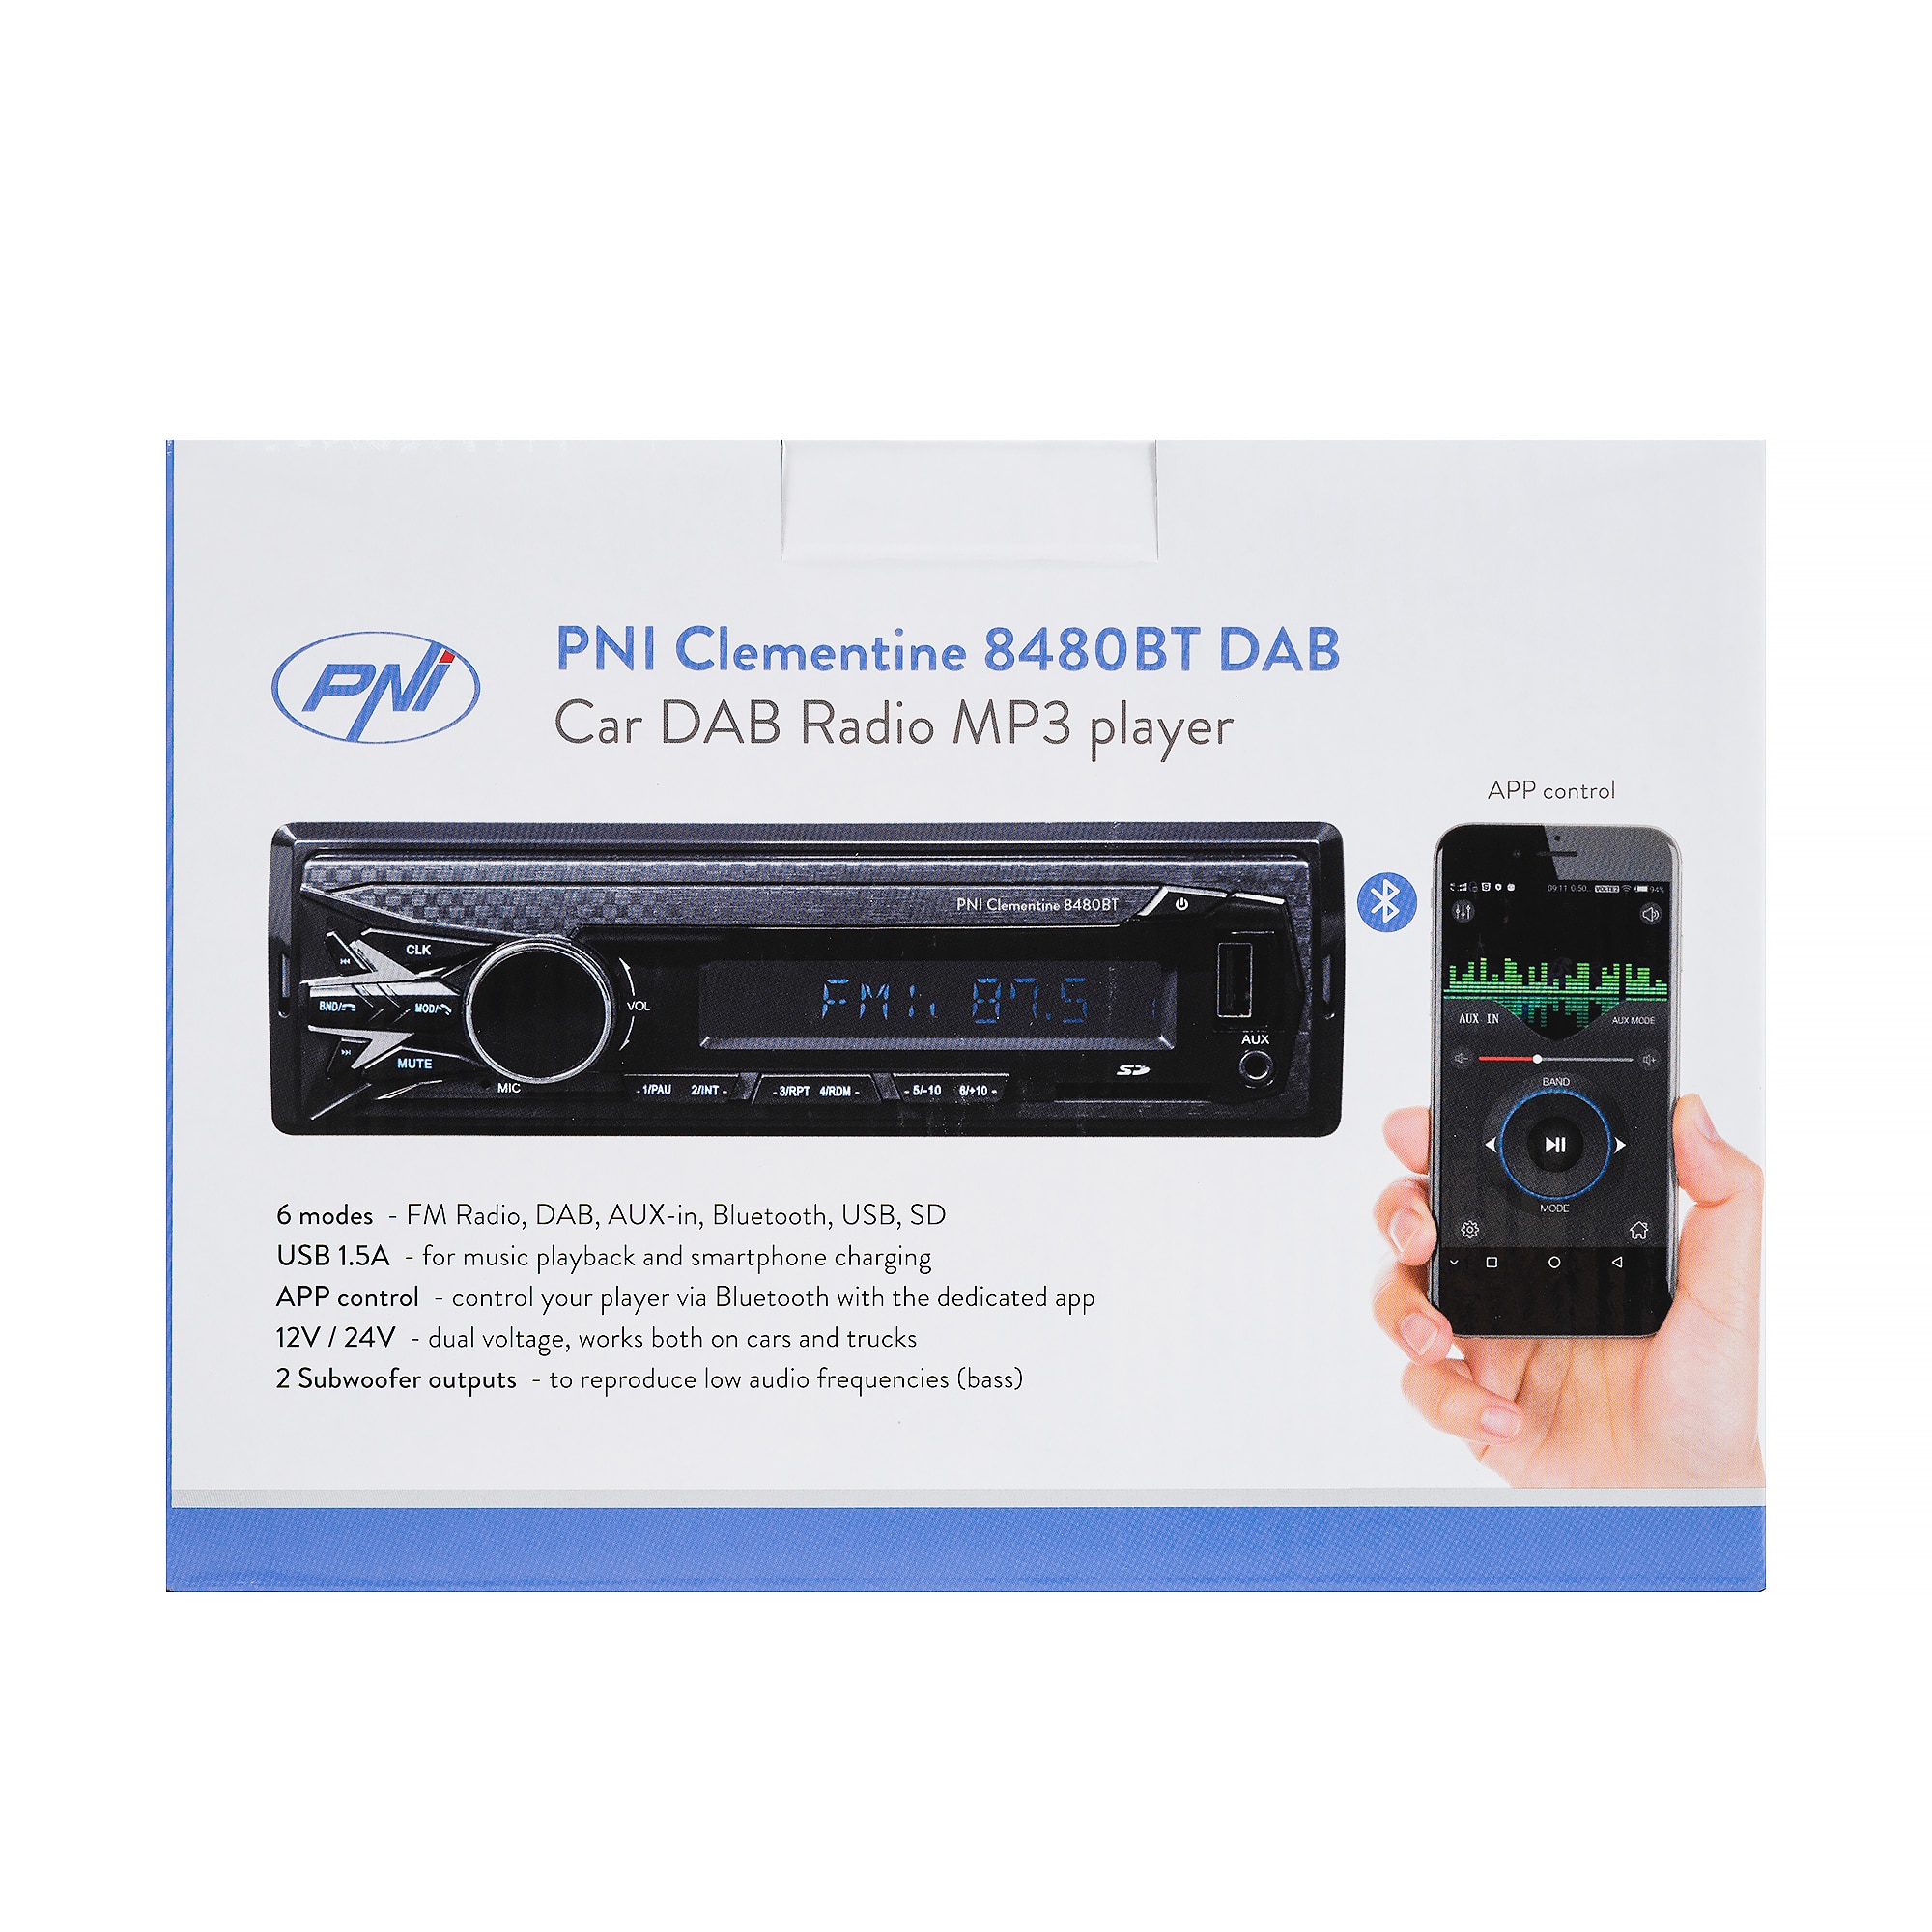  DAB Autoradio MP3 car Player PNI Clementine 8480BT 4x45w, 12 /  24V, 1 DIN, with SD, USB, AUX, RCA, Bluetooth and USB 1.5A for Phone  Charging : Electronics